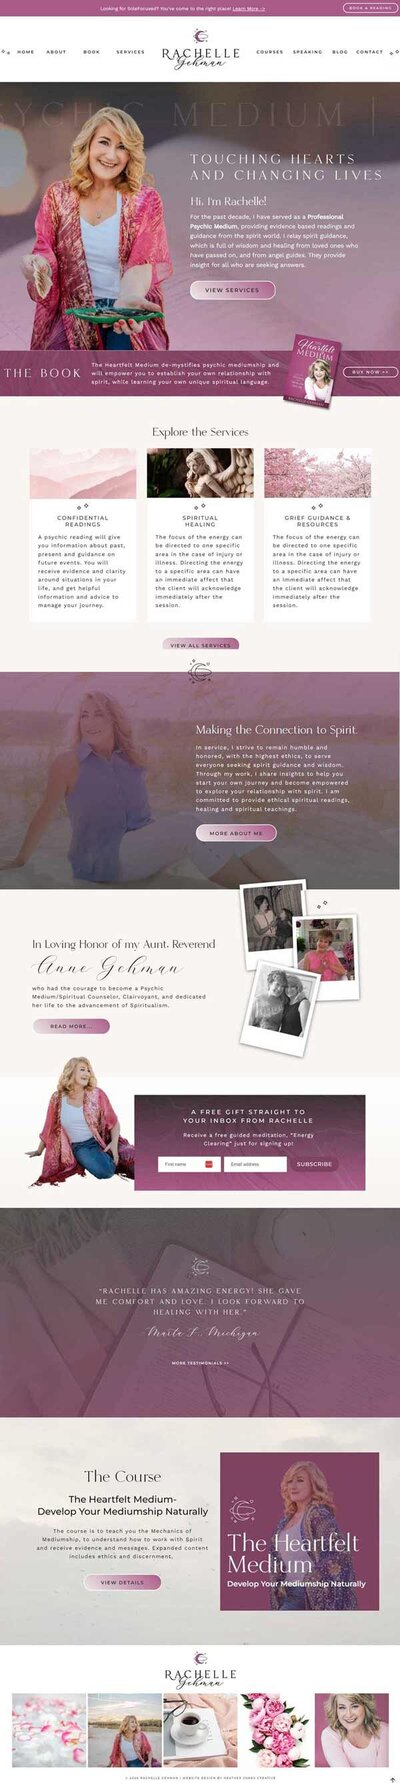 Embark on a journey of spiritual discovery with a comprehensive view of Rachelle's homepage. Meticulously designed by a Showit Web Design expert, this layout harmonizes aesthetic appeal with intuitive navigation seamlessly.